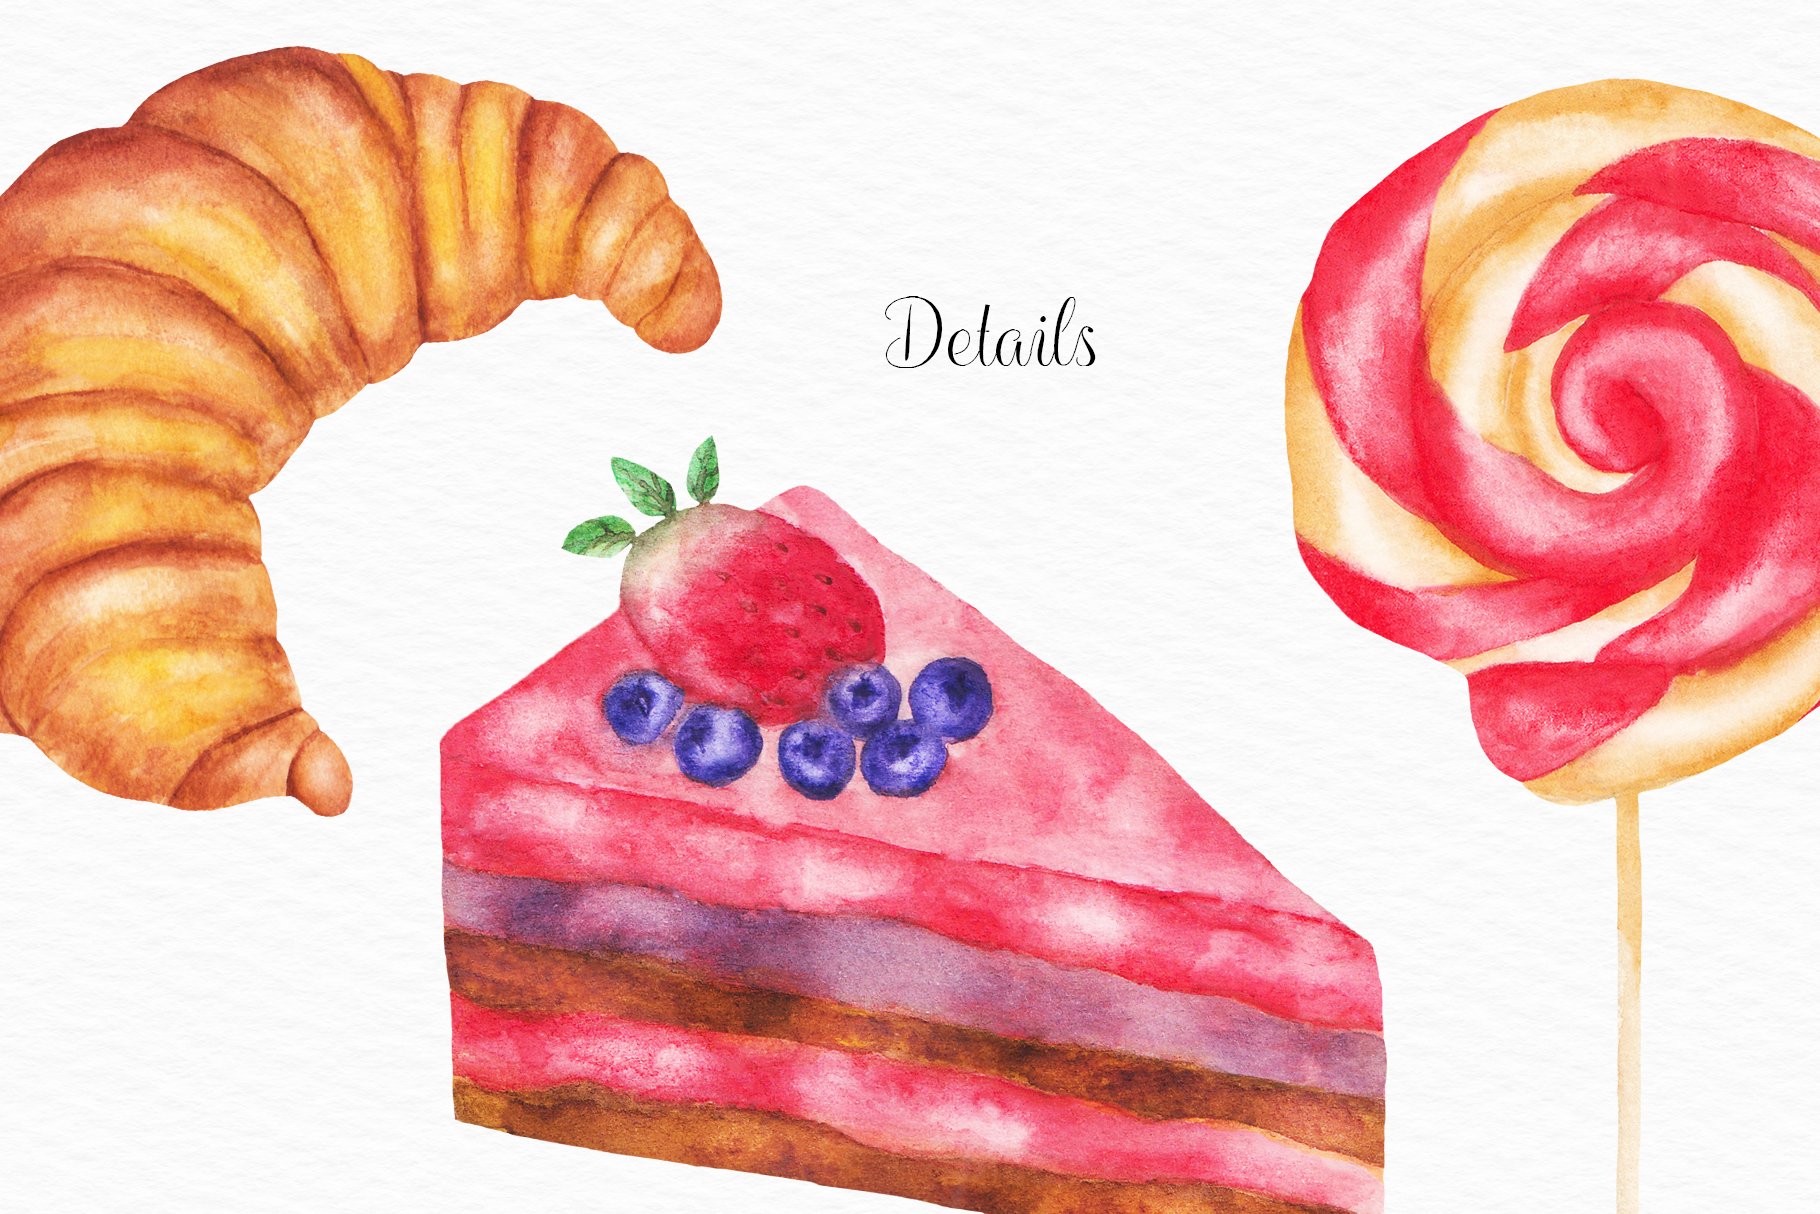 Best parts of desserts - croissant, piece of cake and other sweets.